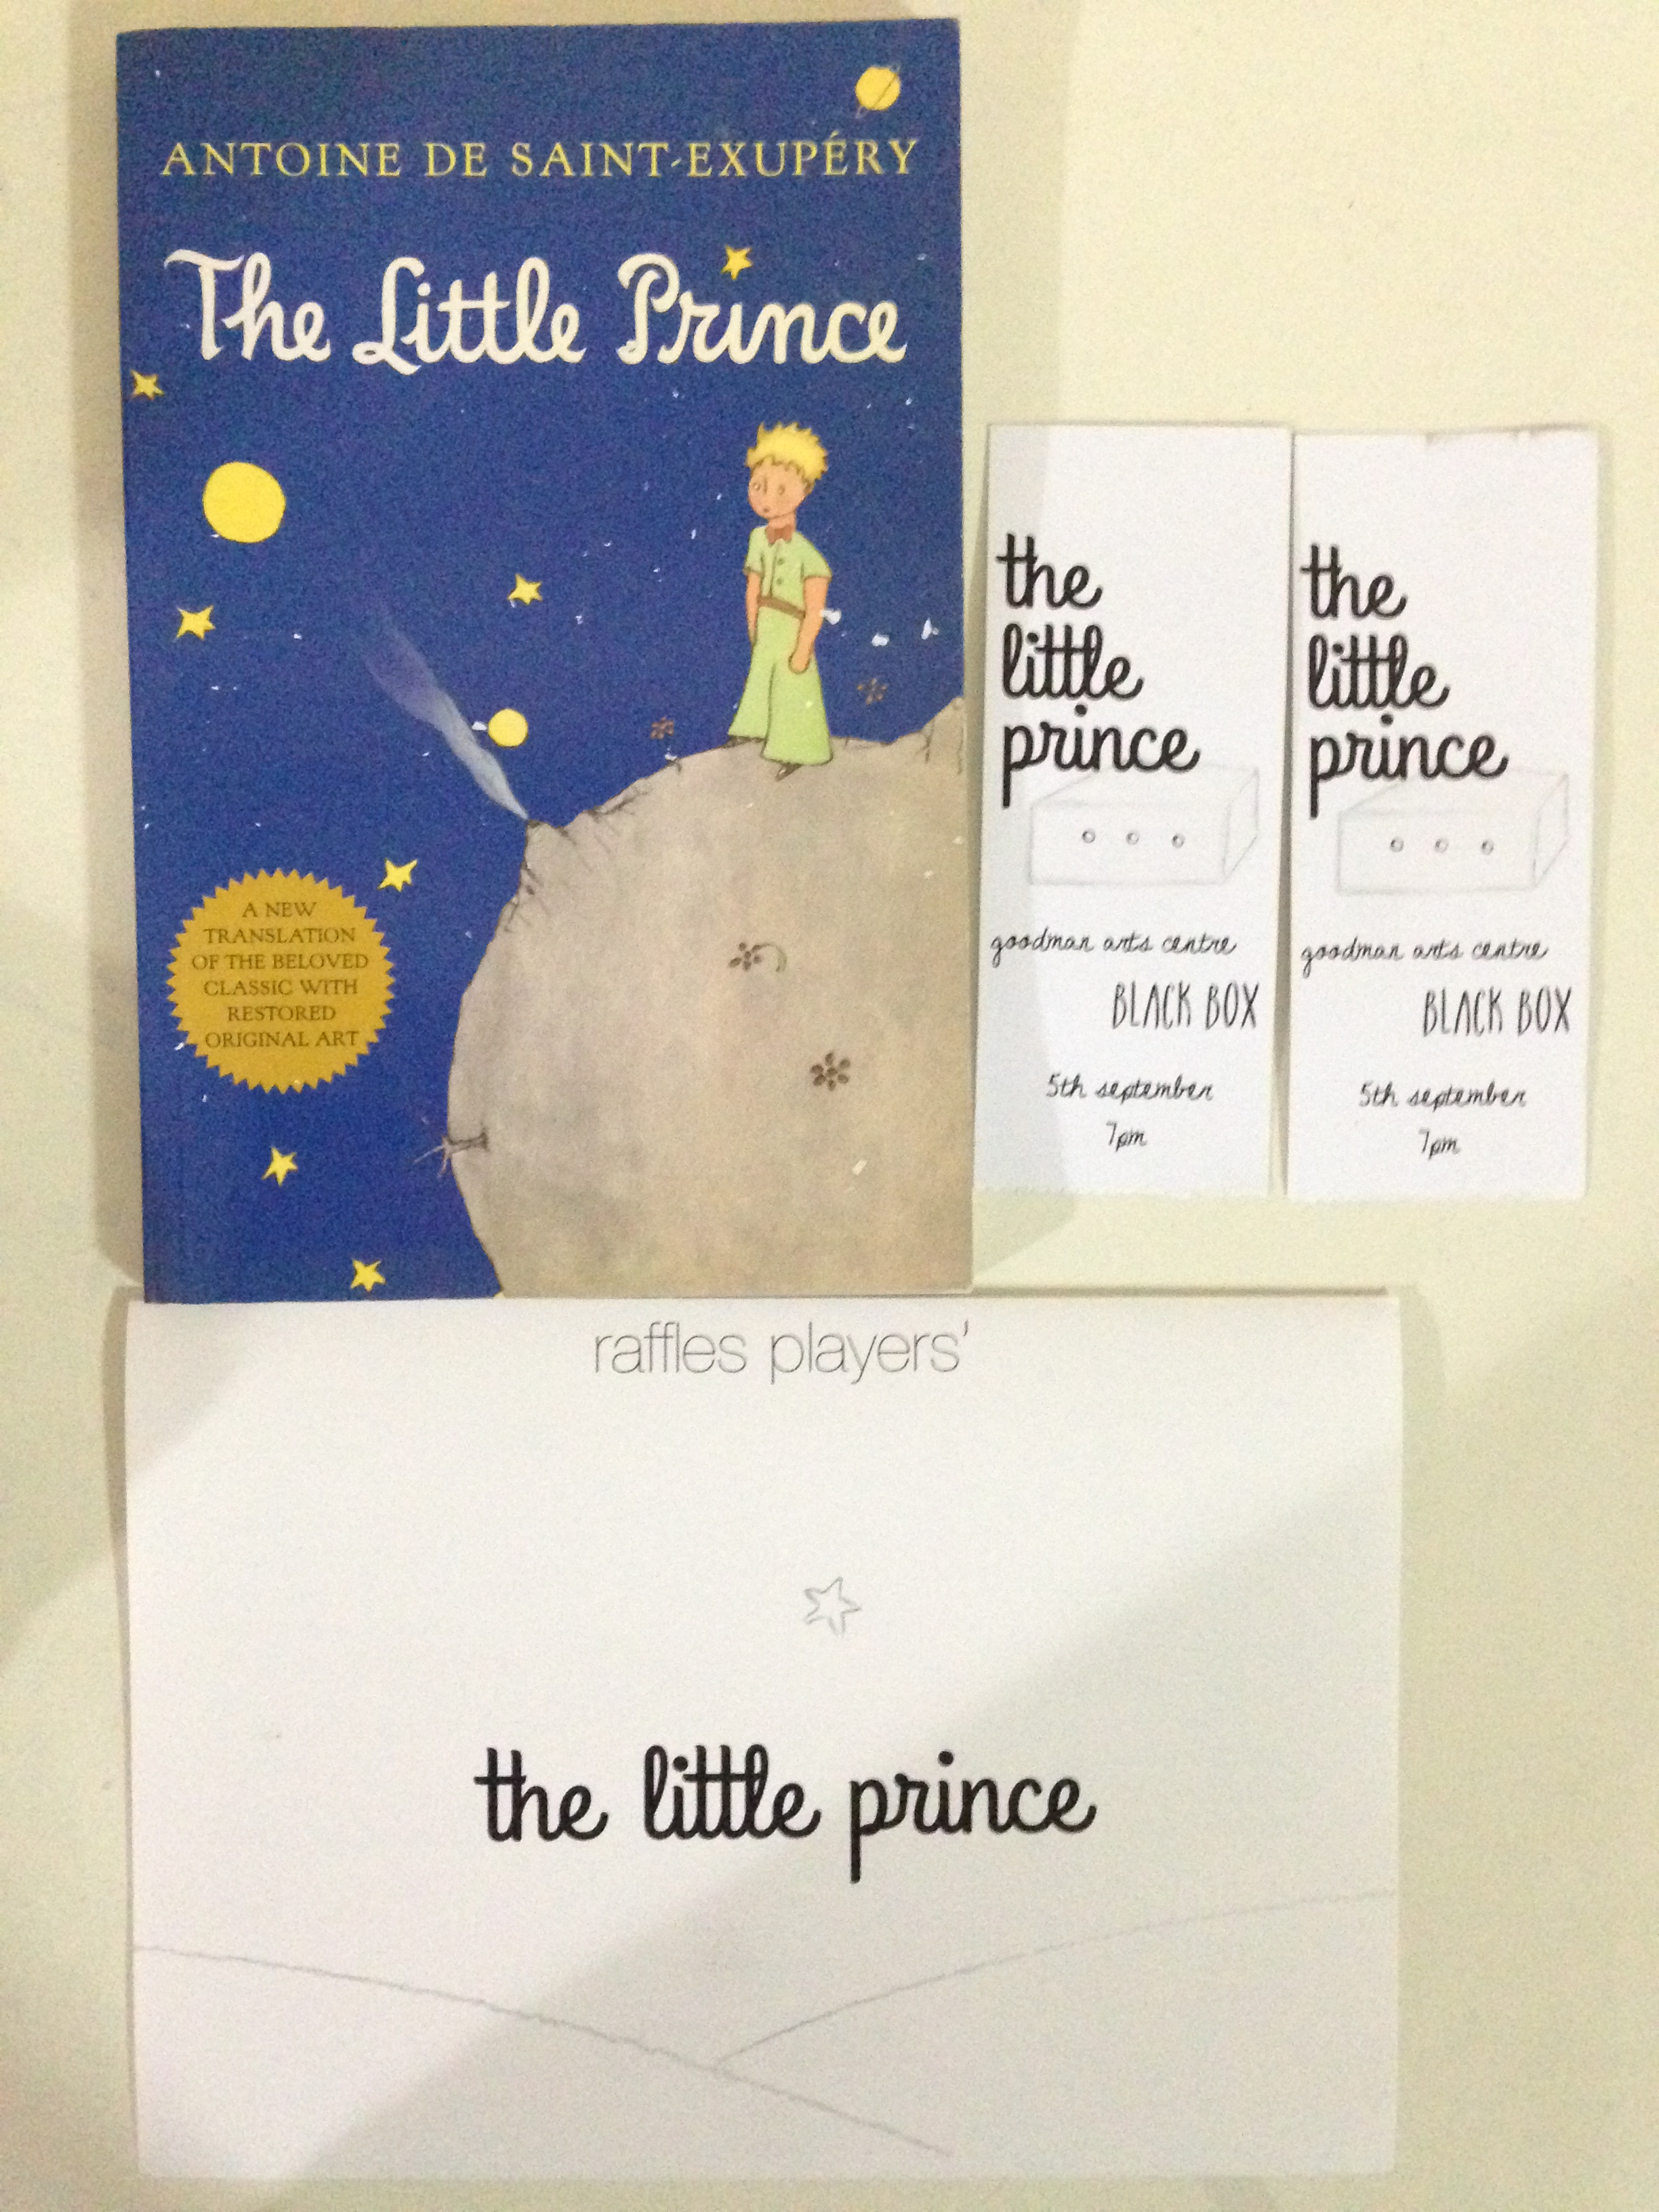 "The Little Prince" book, programme booklet, and tickets.